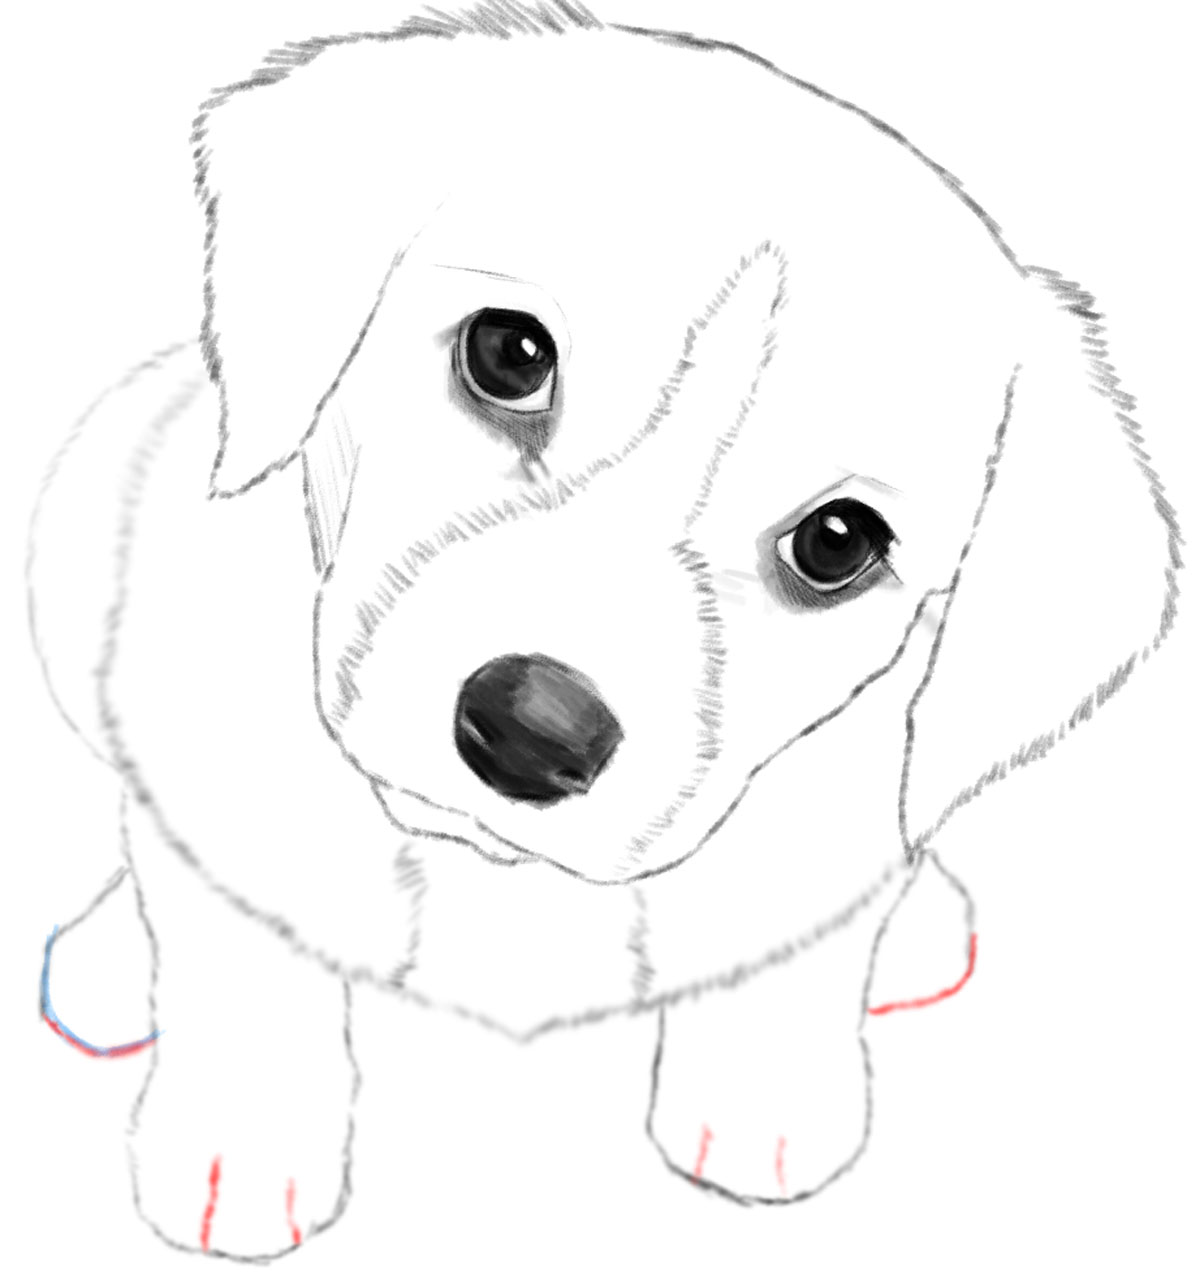 How To Draw A Dog For Beginners [Video Tutorial]